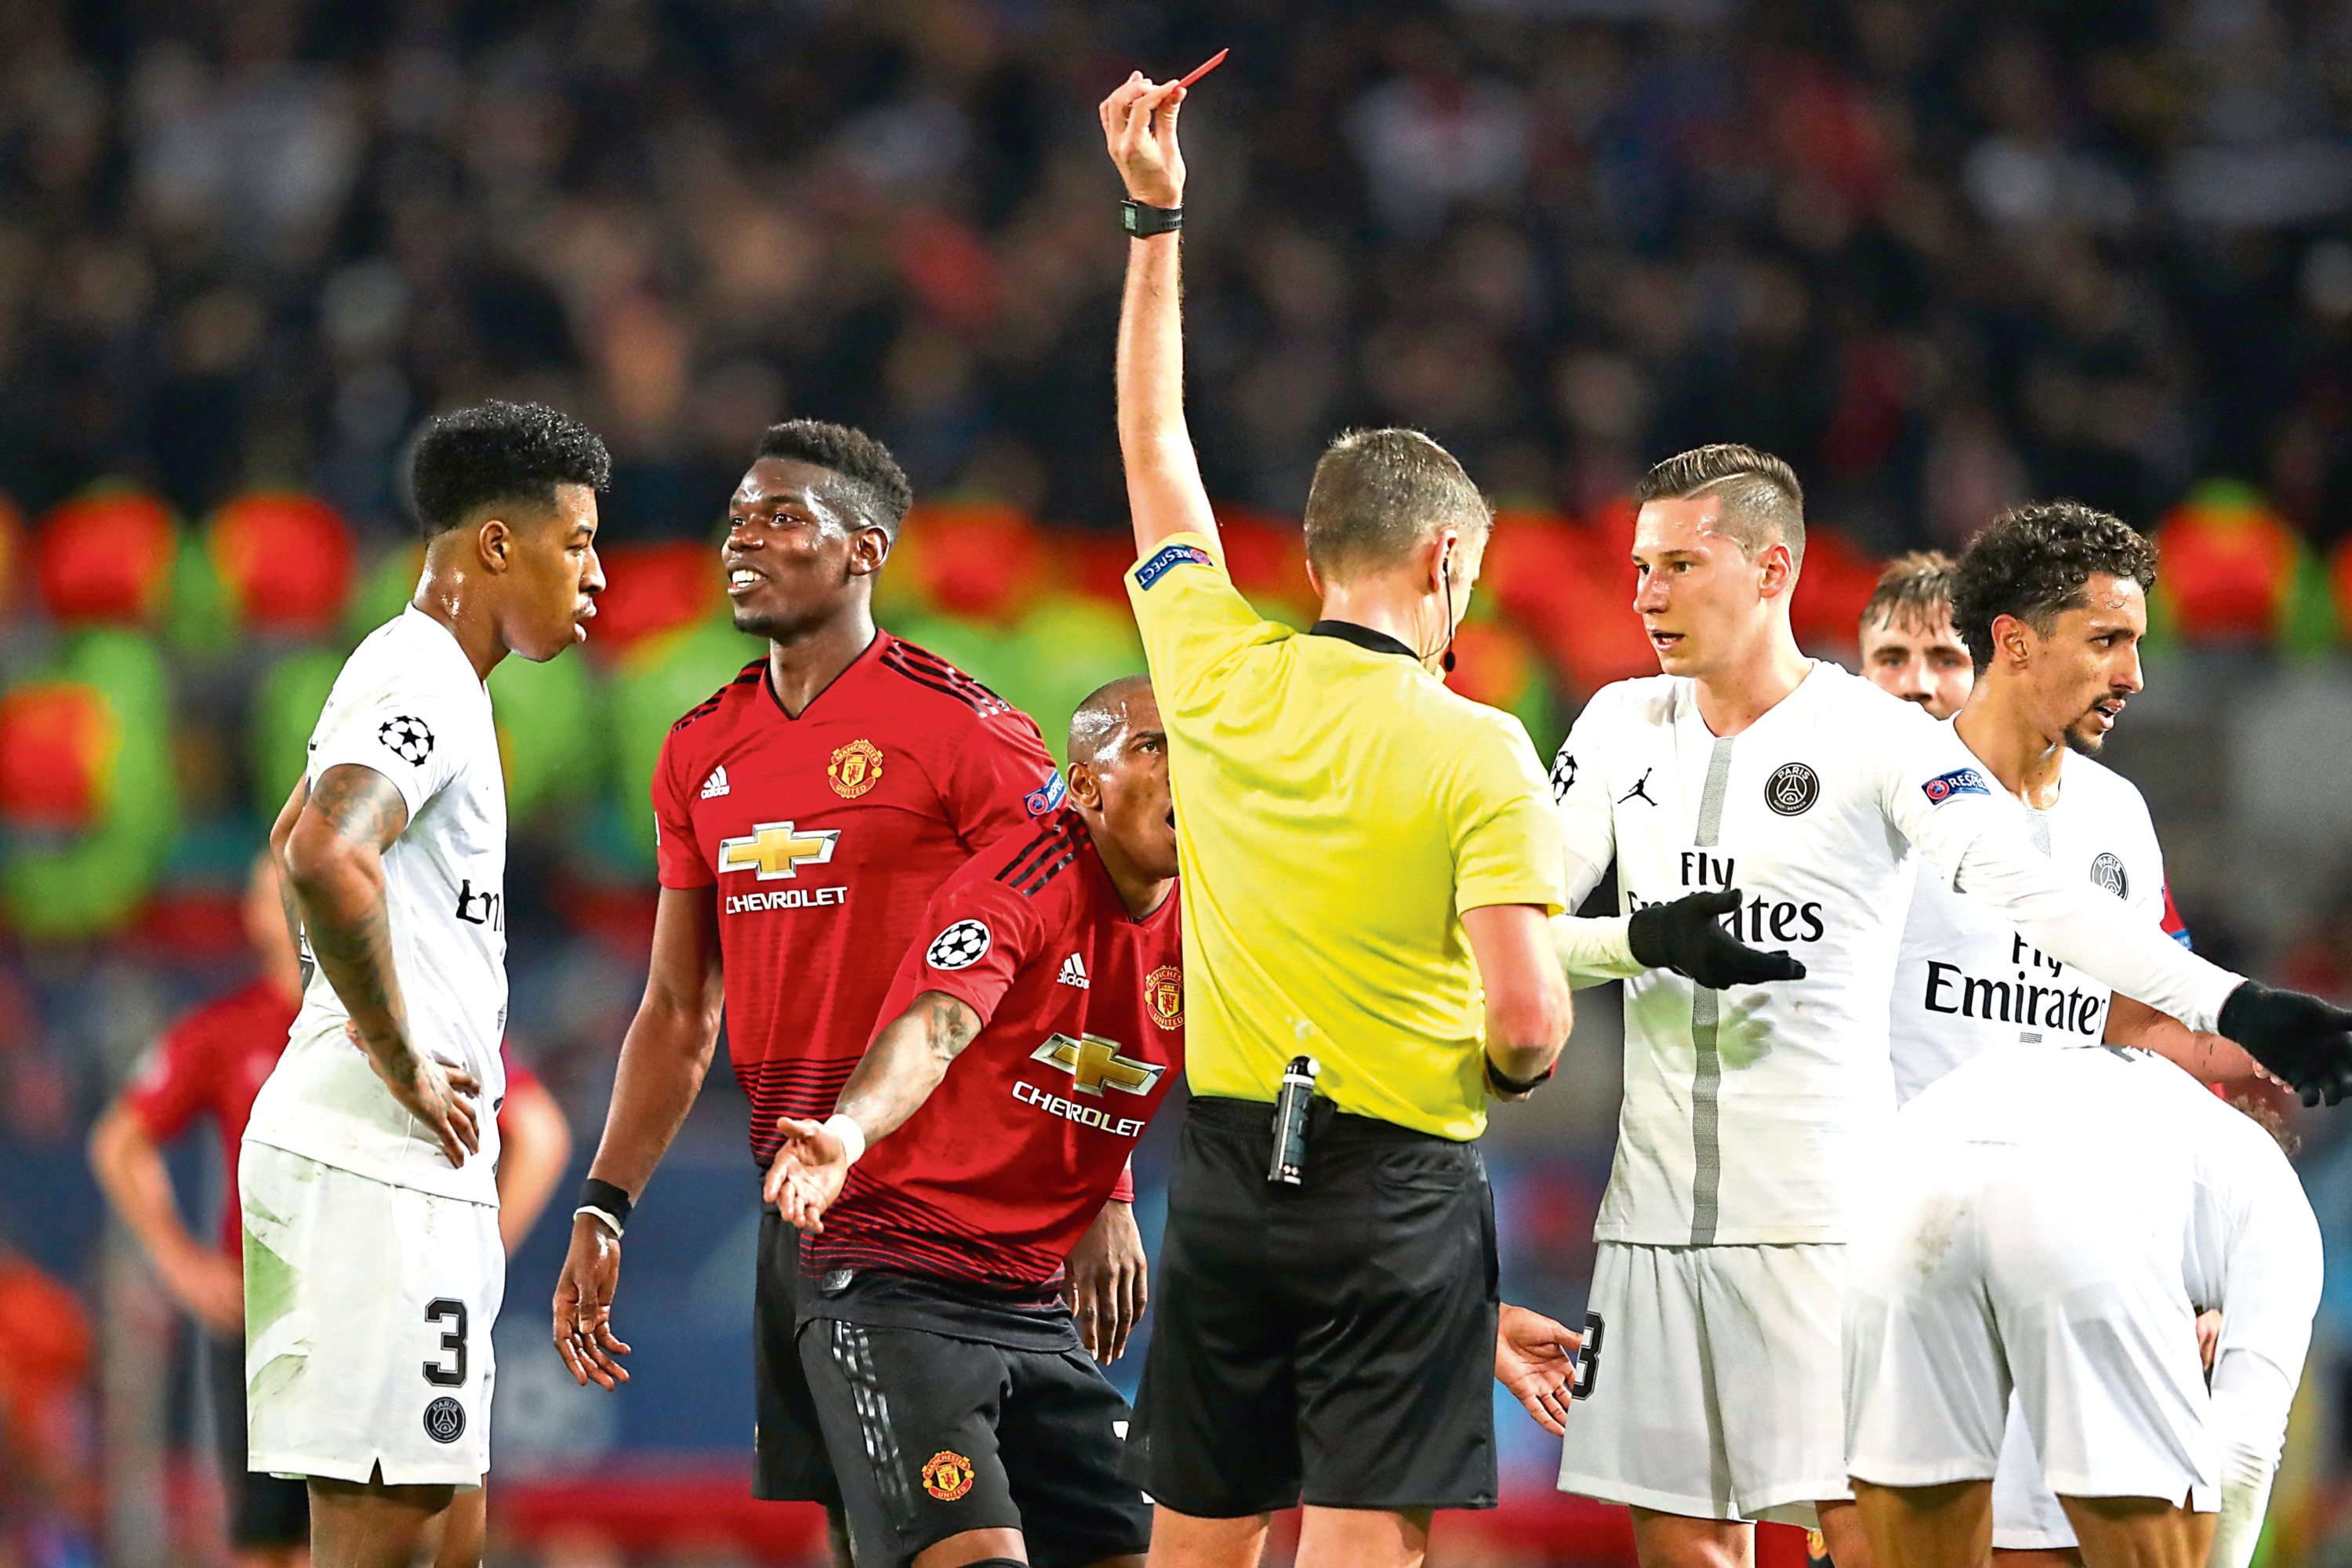 Paul Pogba sees red in the Champion's League